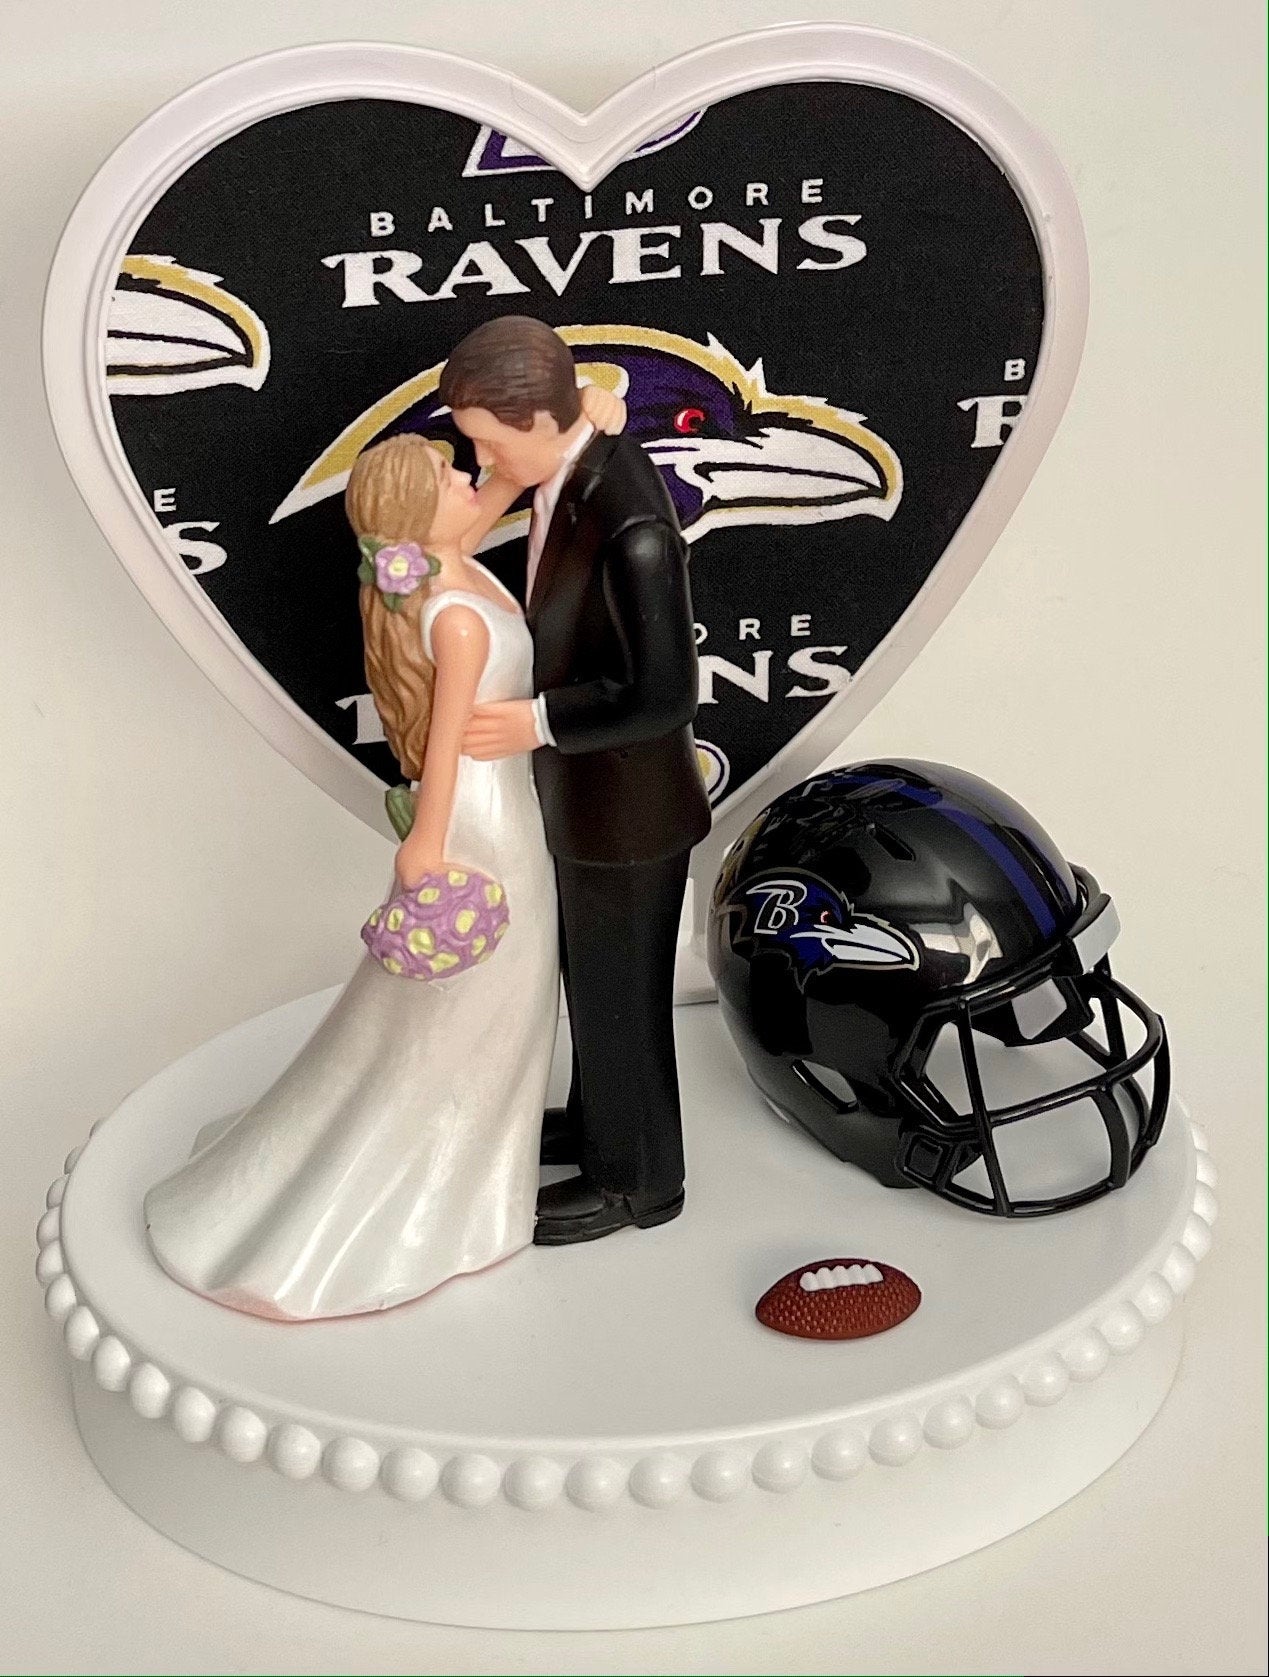 Wedding Cake Topper Baltimore Ravens Football Themed Beautiful Long-Haired Bride and Groom Sports Fans One-of-a-Kind Reception Bridal Gift